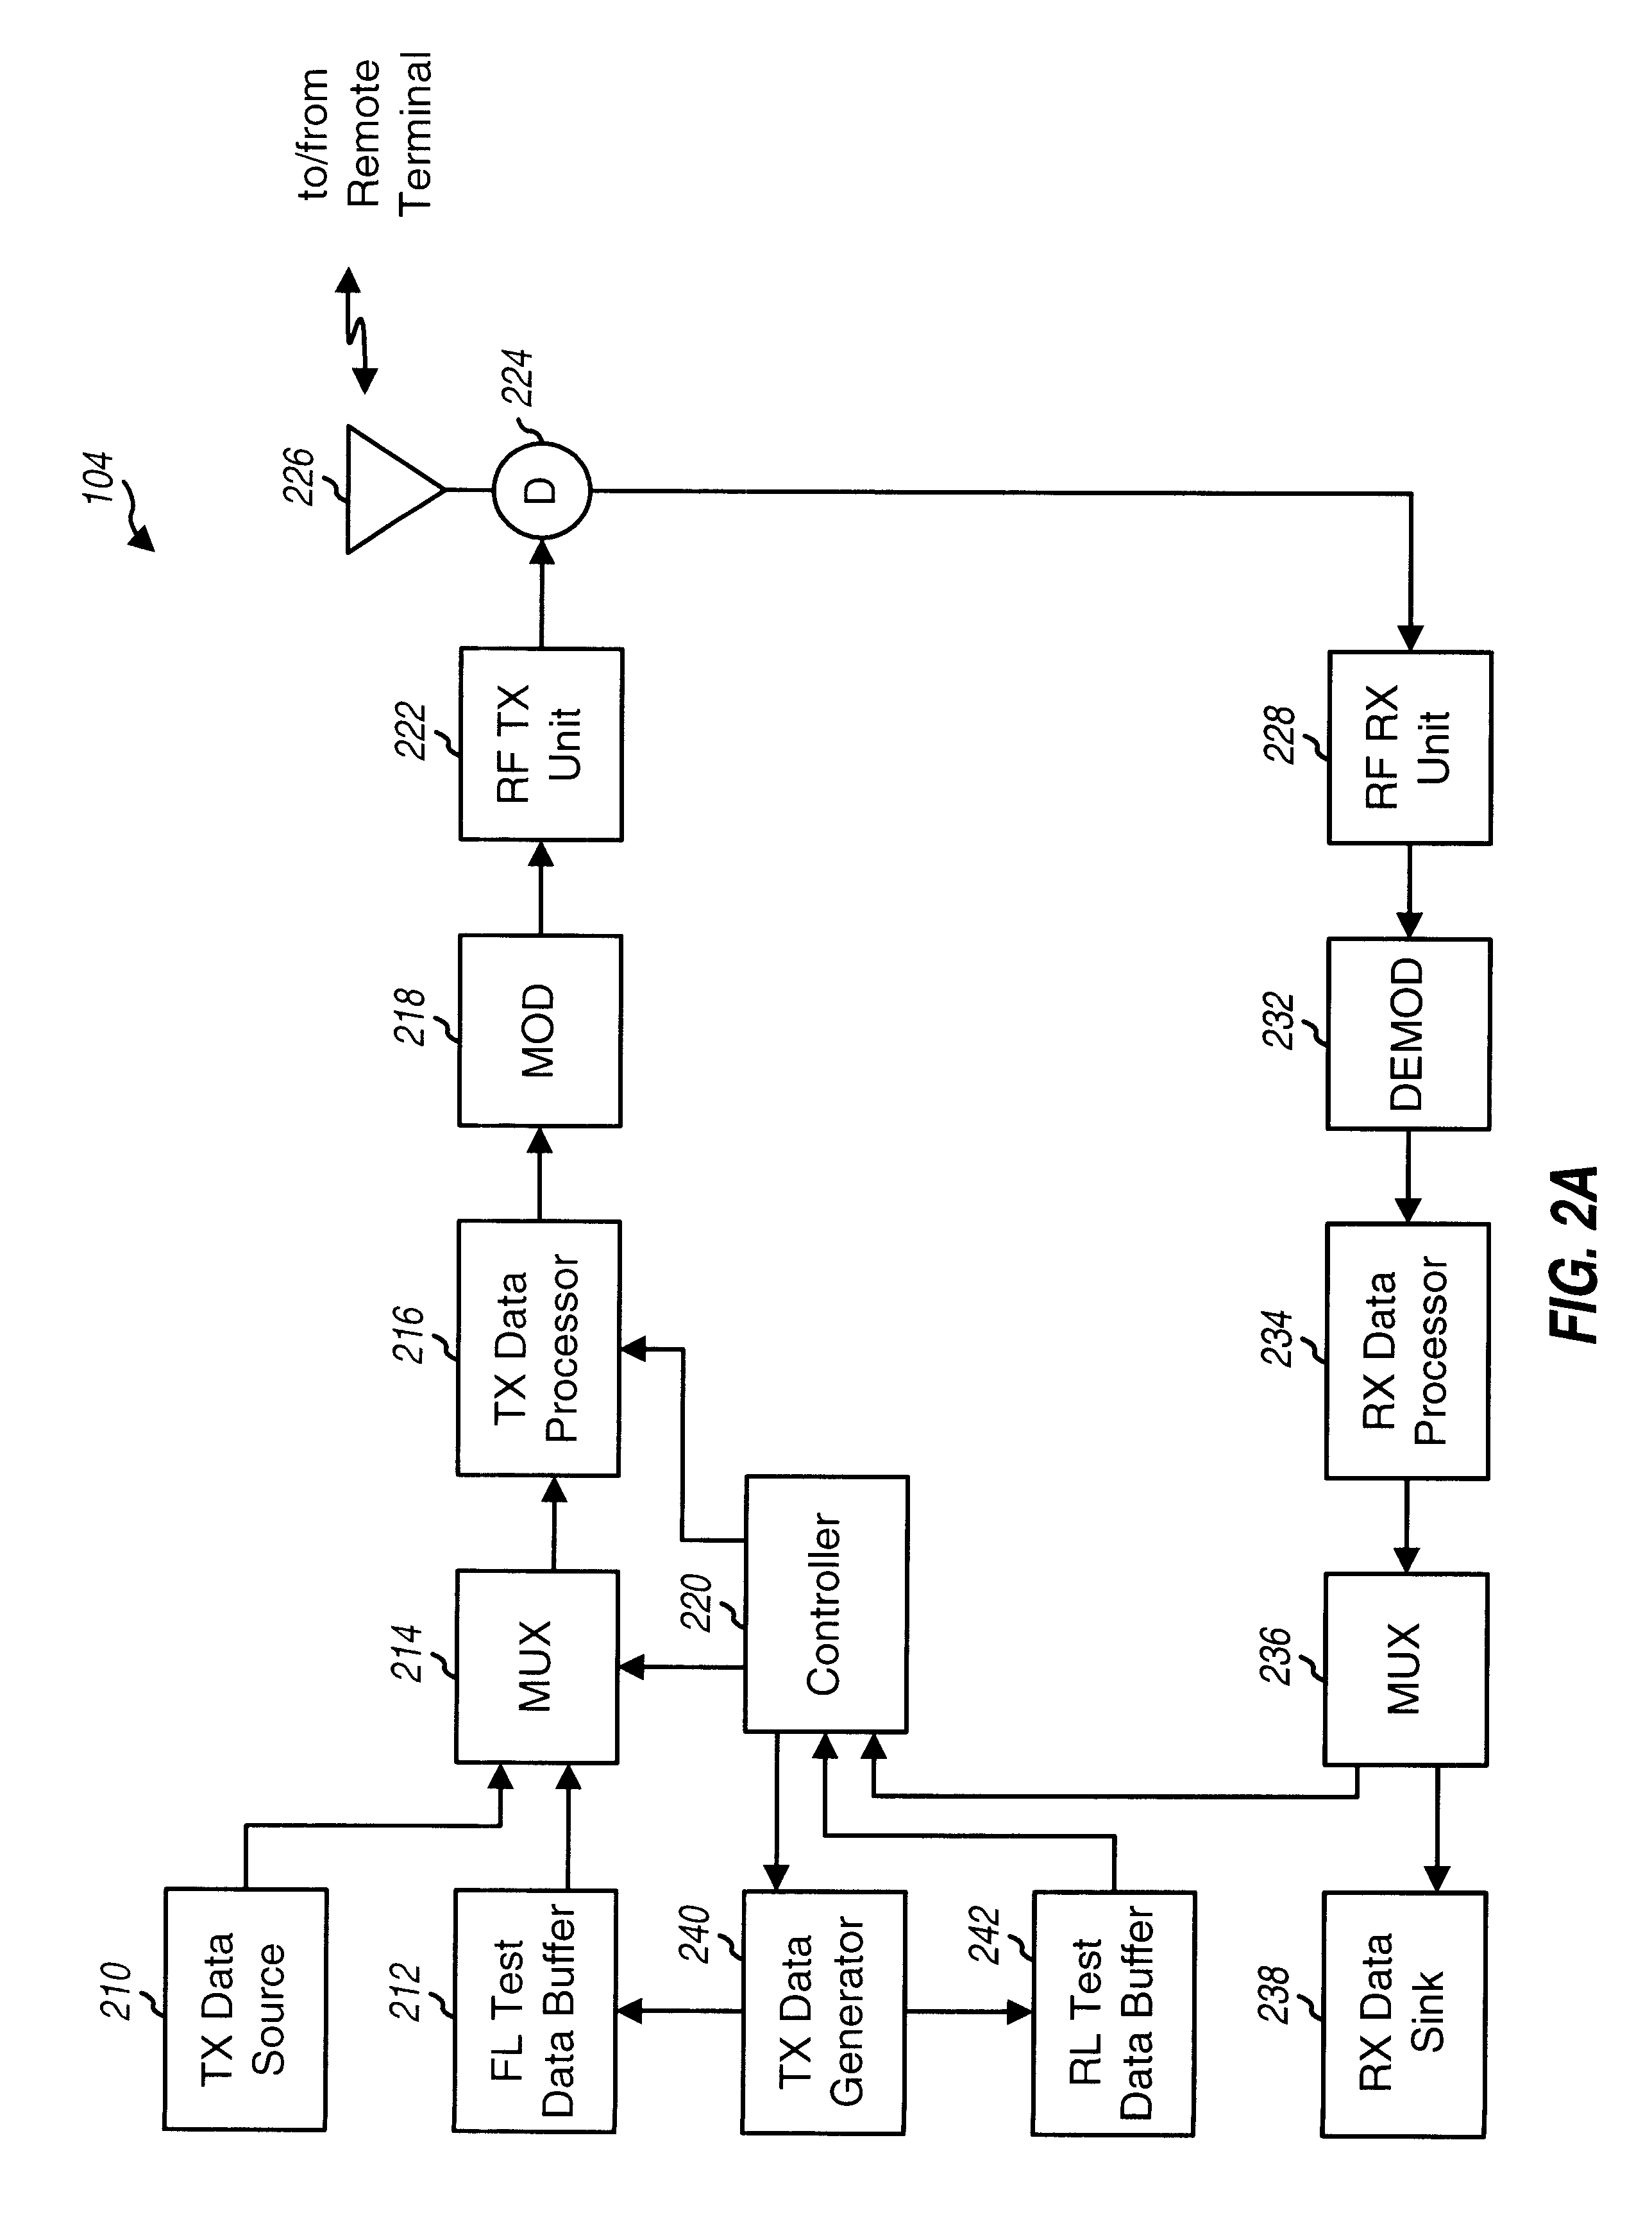 Method and apparatus for testing wireless communication channels